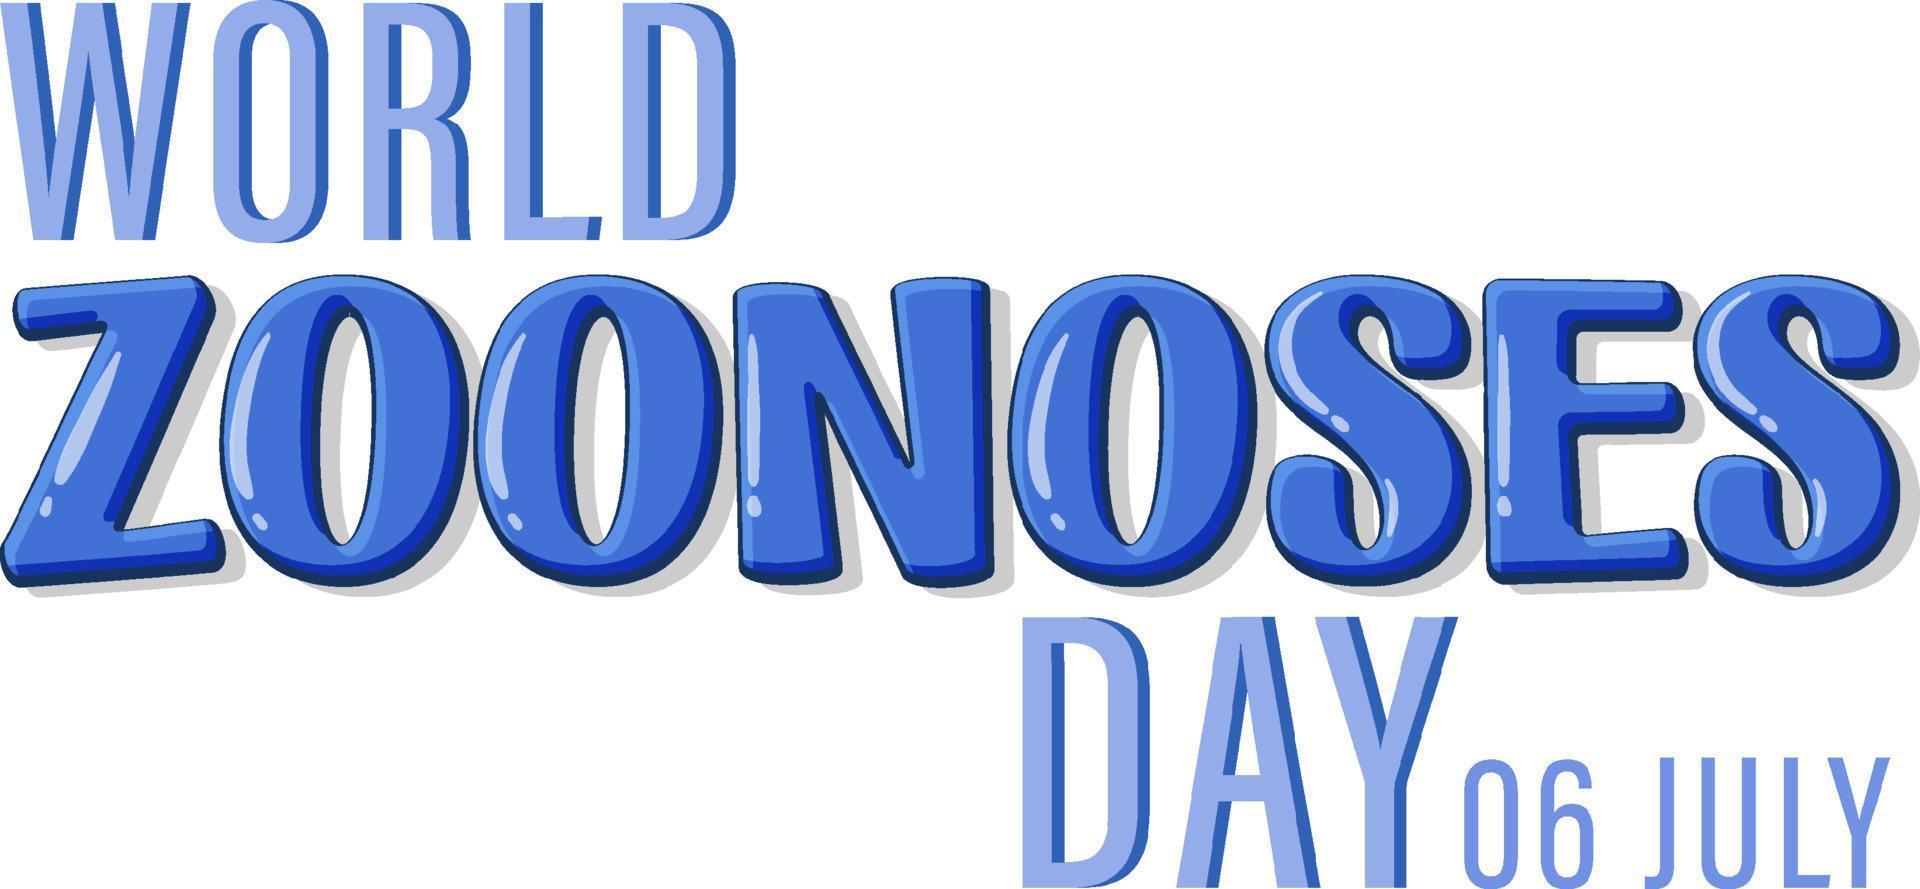 World zoonoses day on 6 July poster design vector